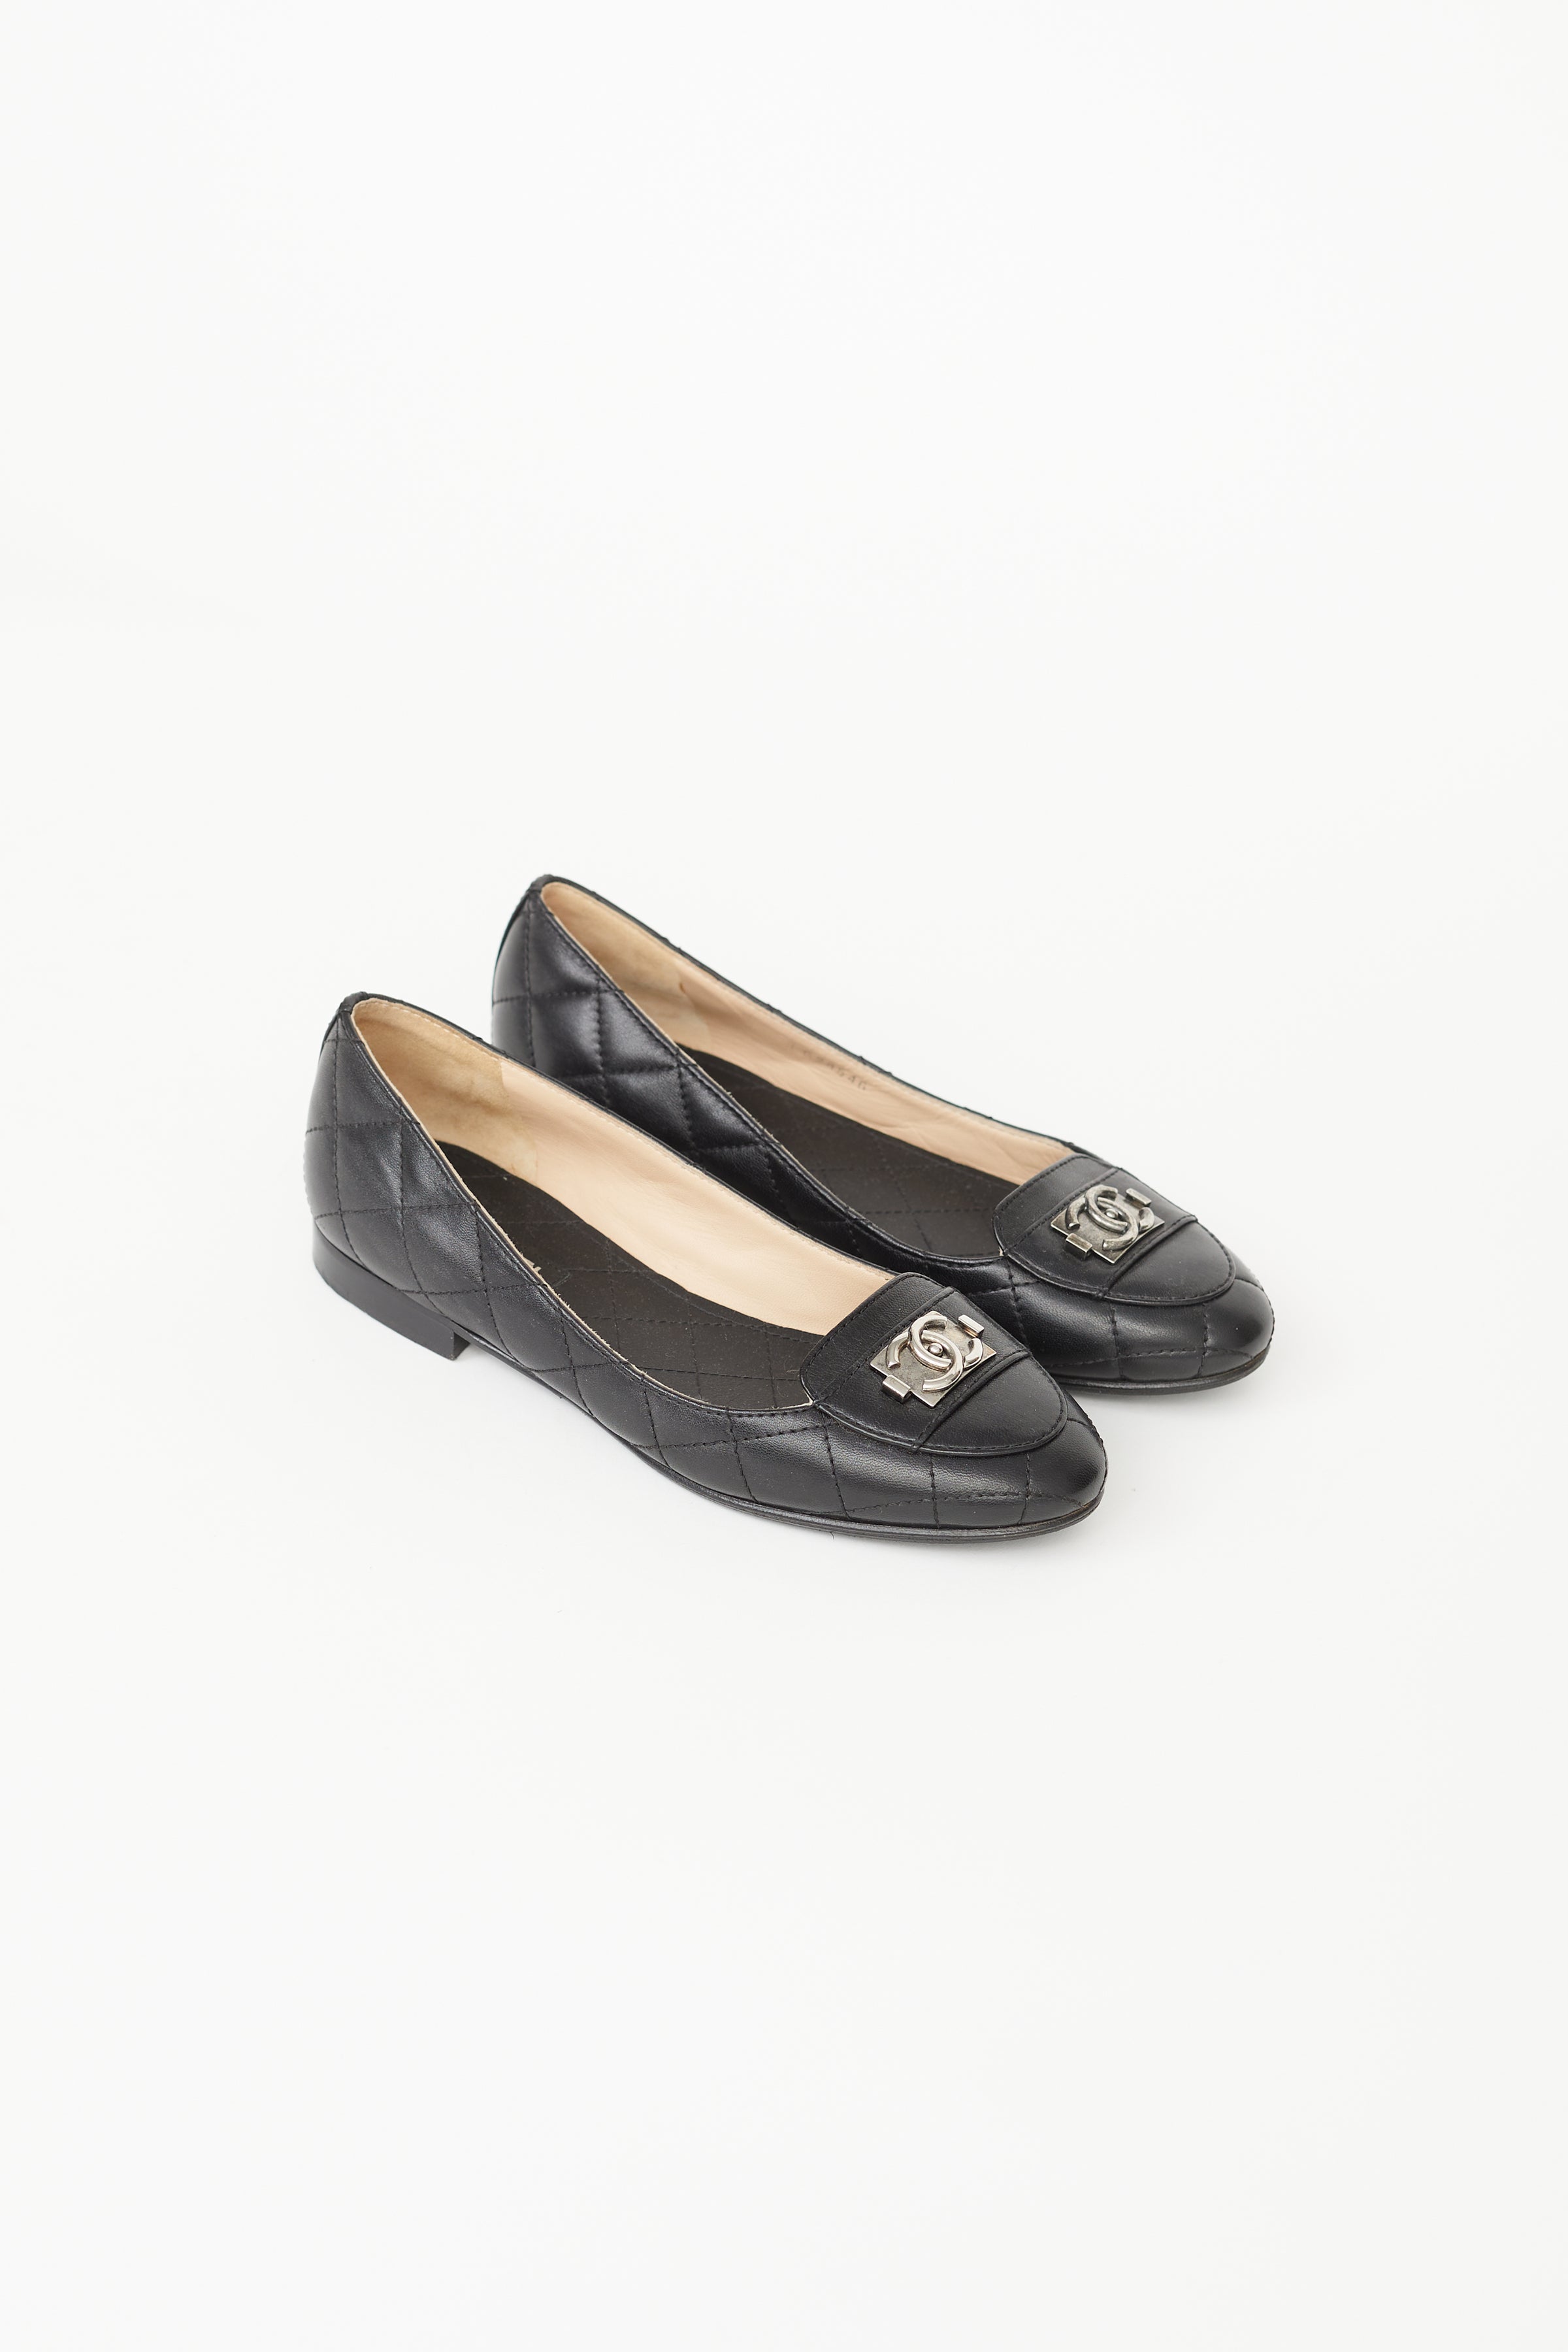 Chanel - Authenticated Ballet Flats - Leather Black Plain for Women, Never Worn